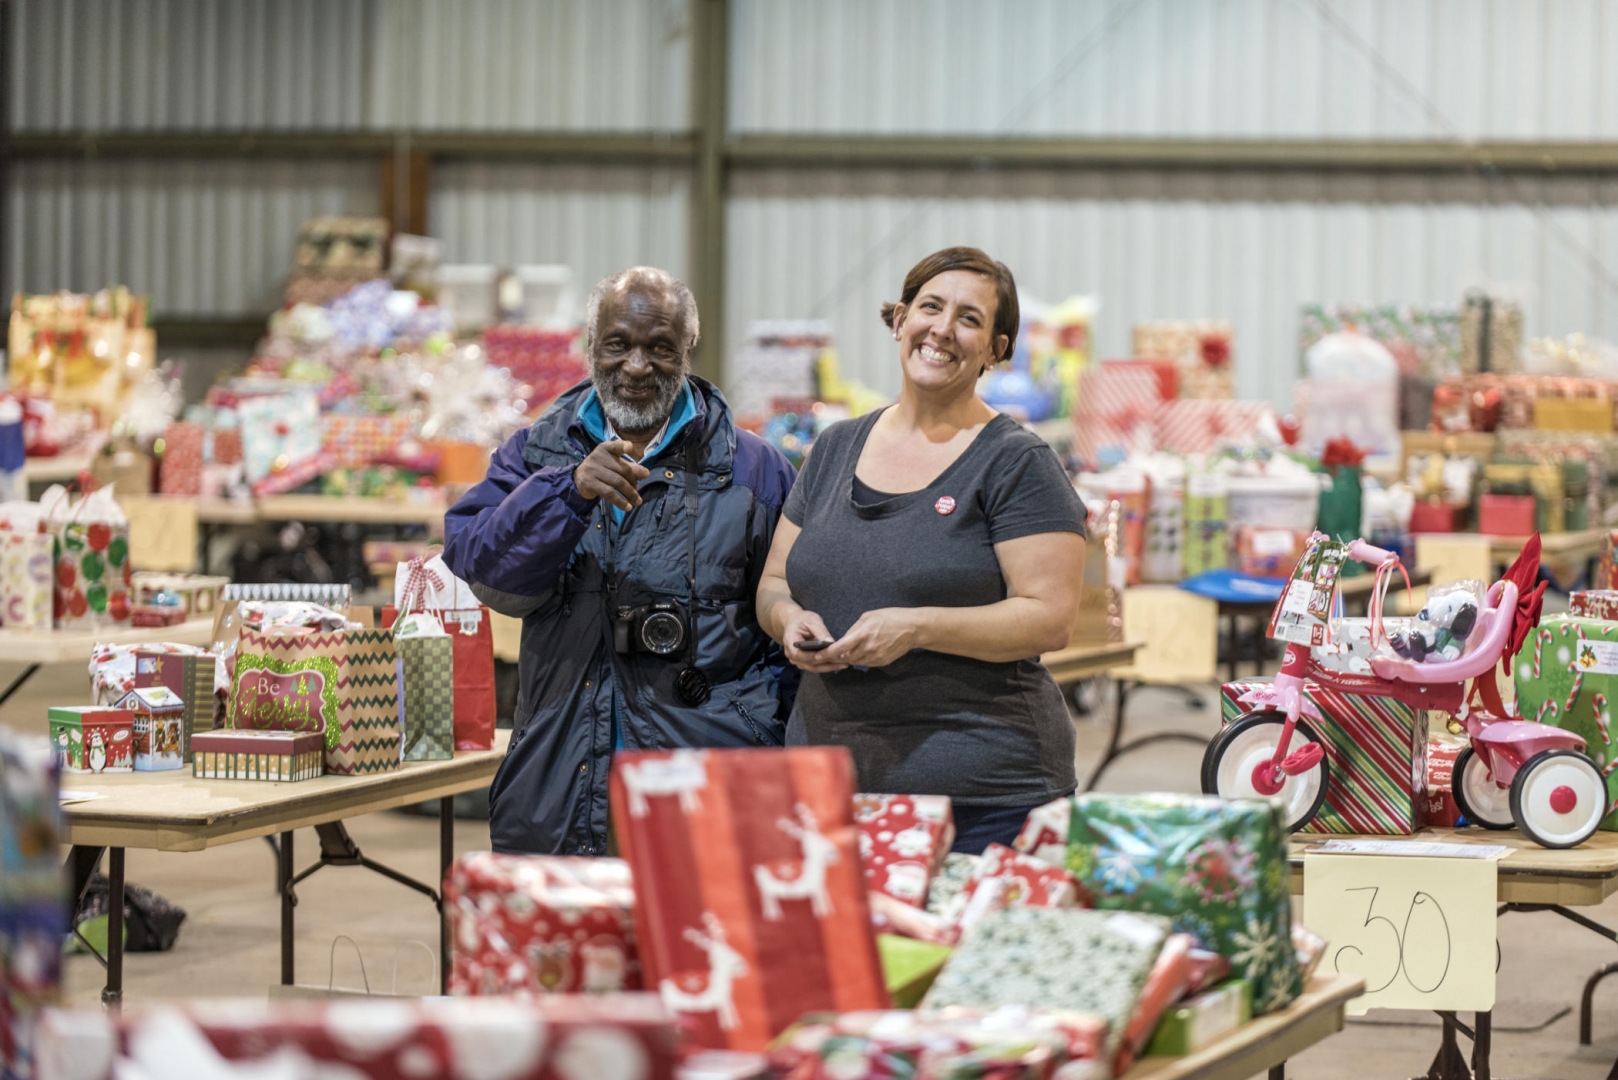 Two staff members smile while standing amid tables filled with wrapped gifts.